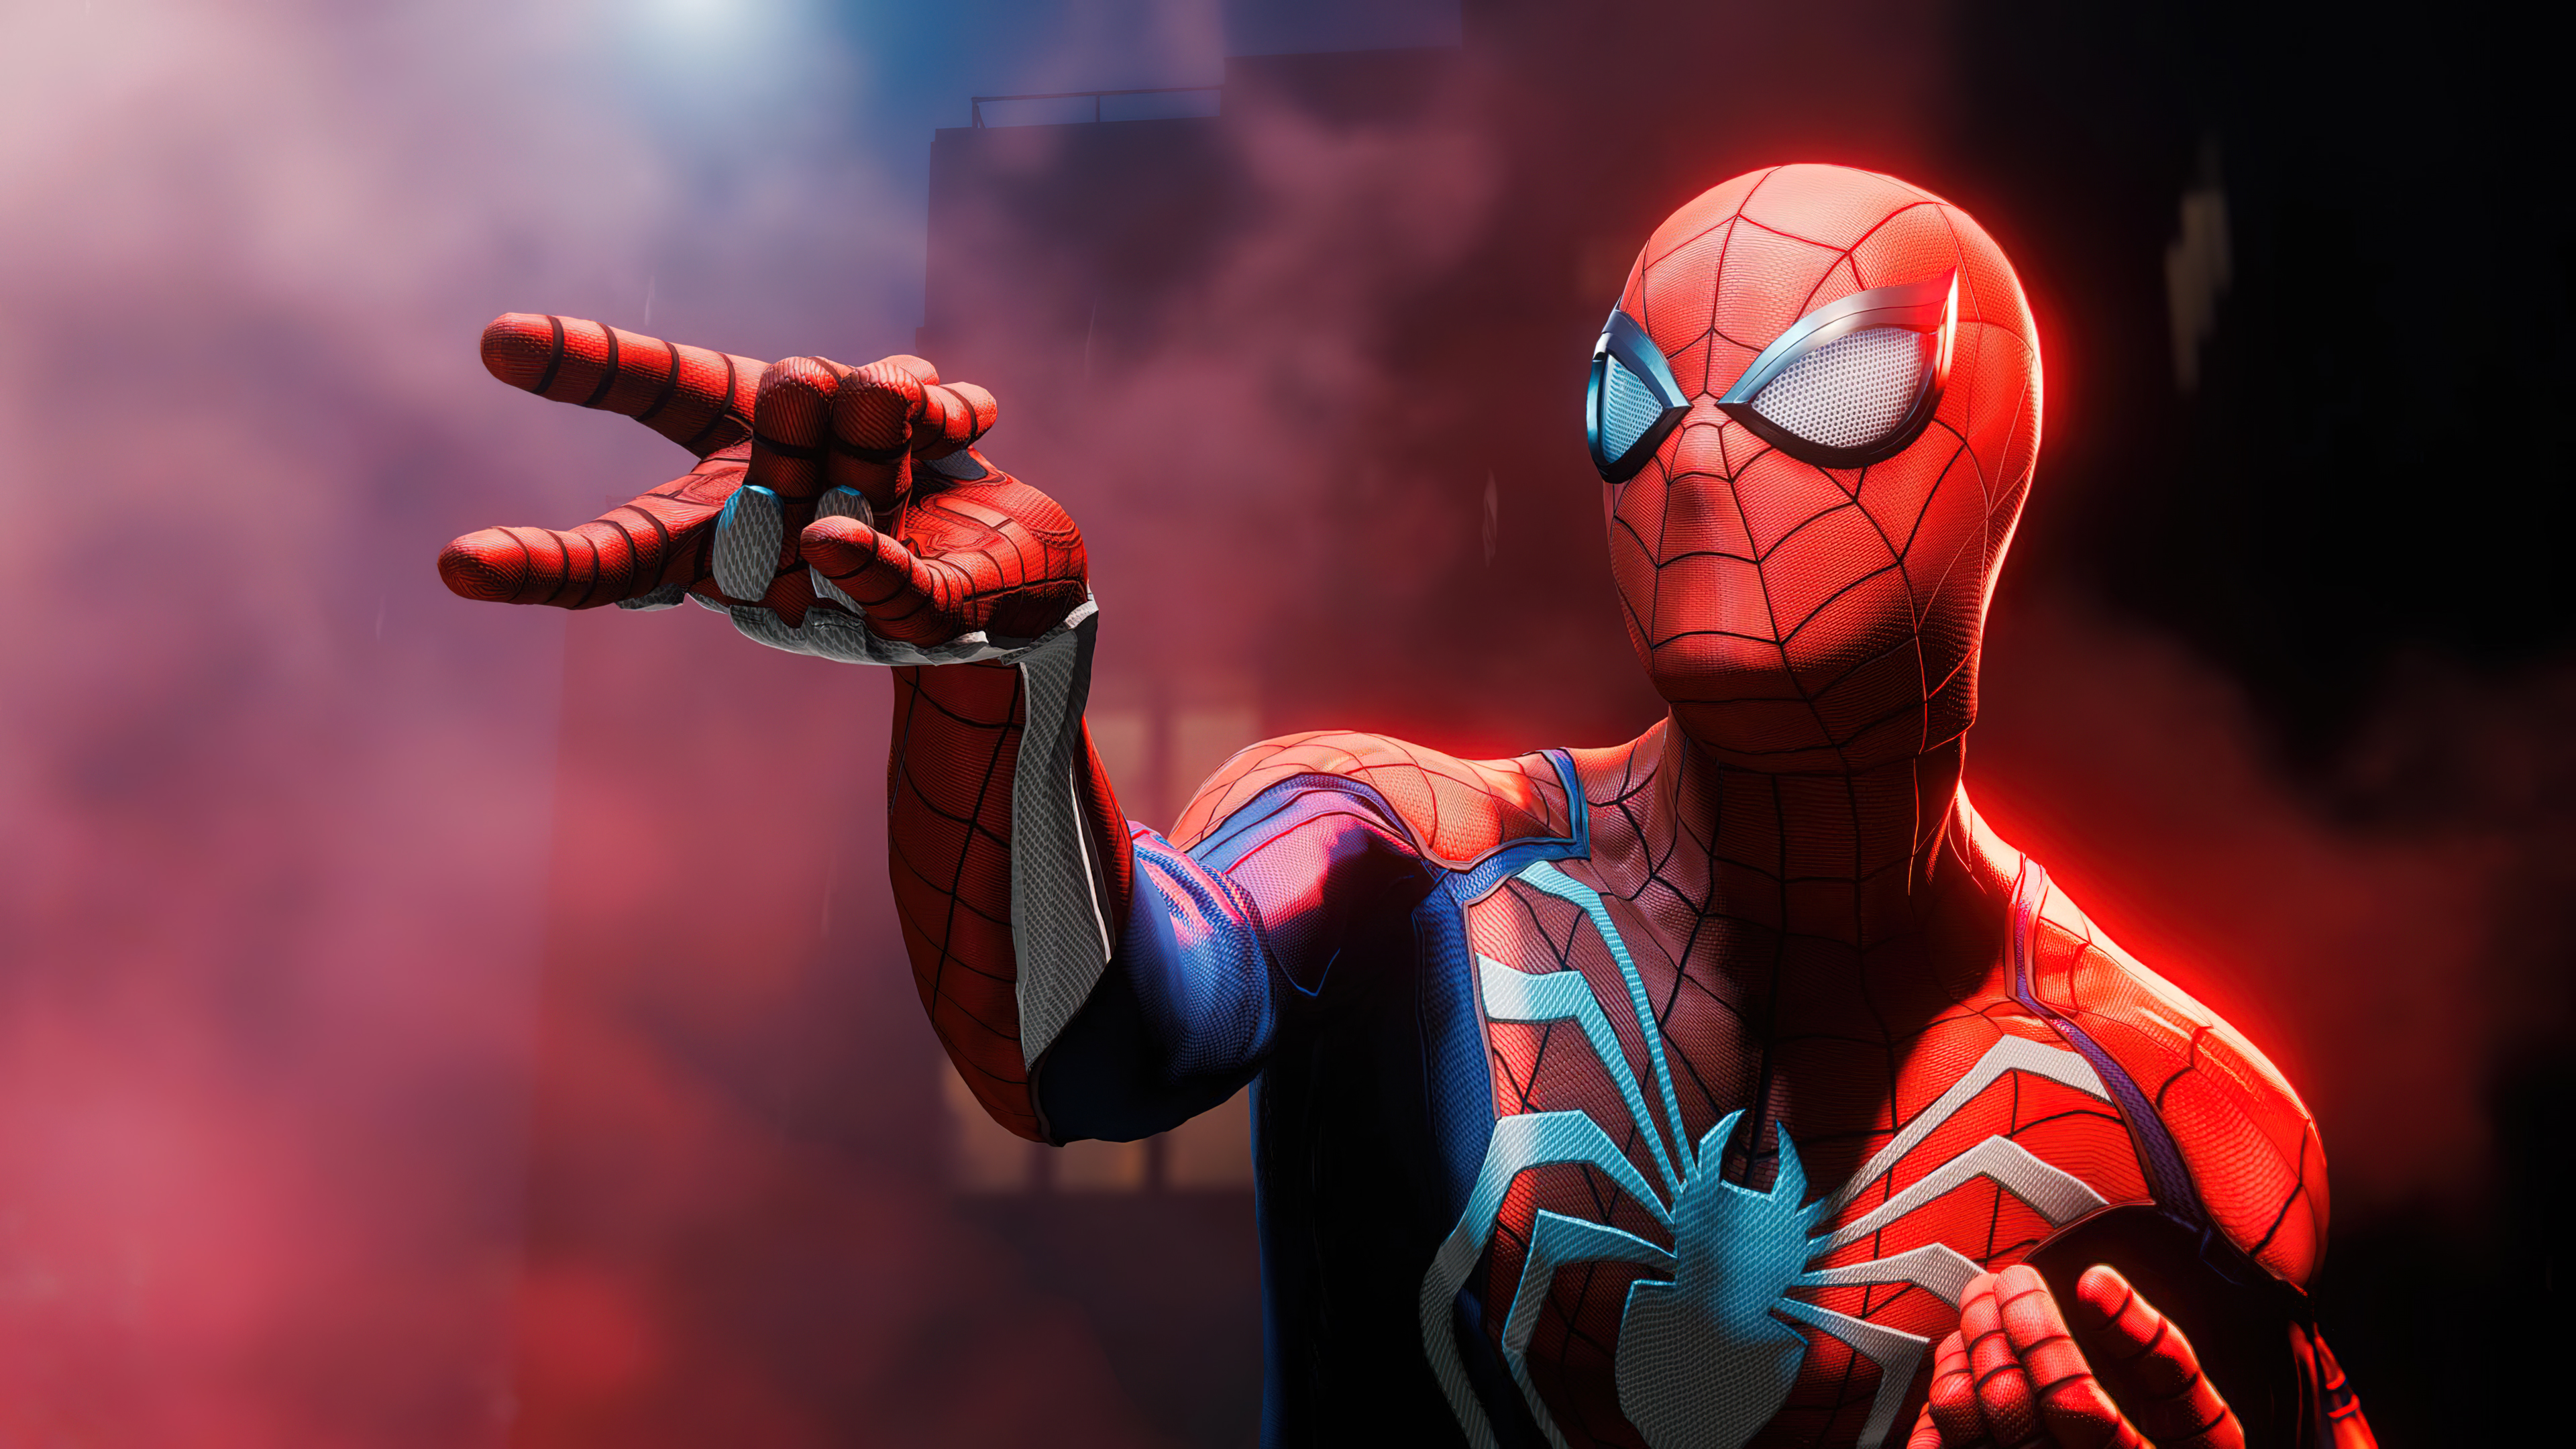 4K wallpaper of Spider-Man for PS4 (alternate version in comments) : r/ Spiderman